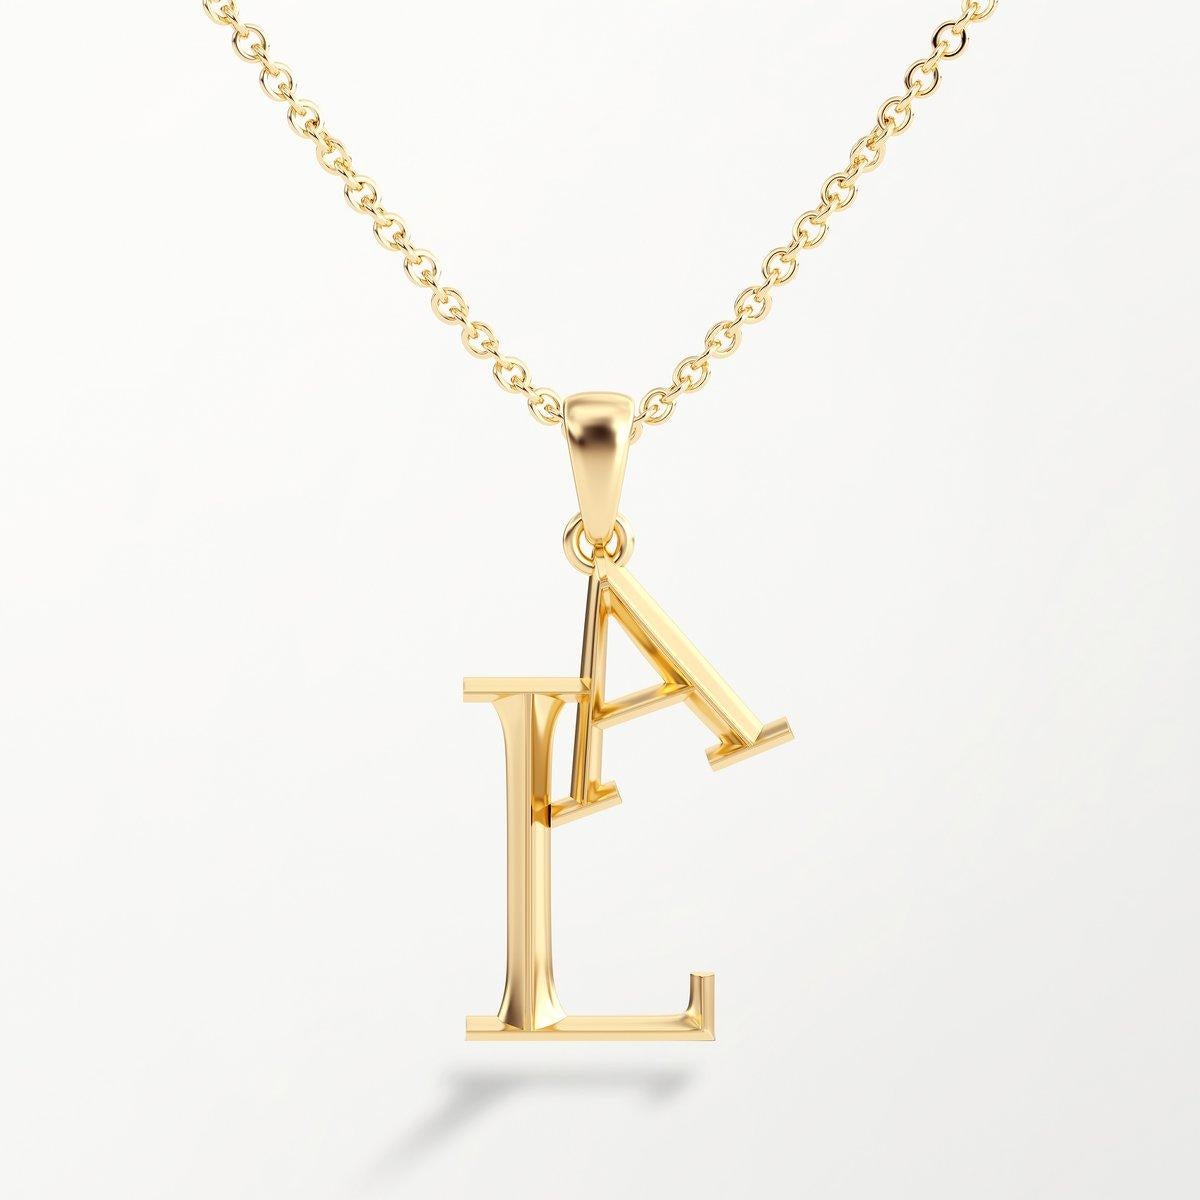 Women's or Men's Medium Initial Pendant Necklace in 18k Yellow, White or Rose Gold 17